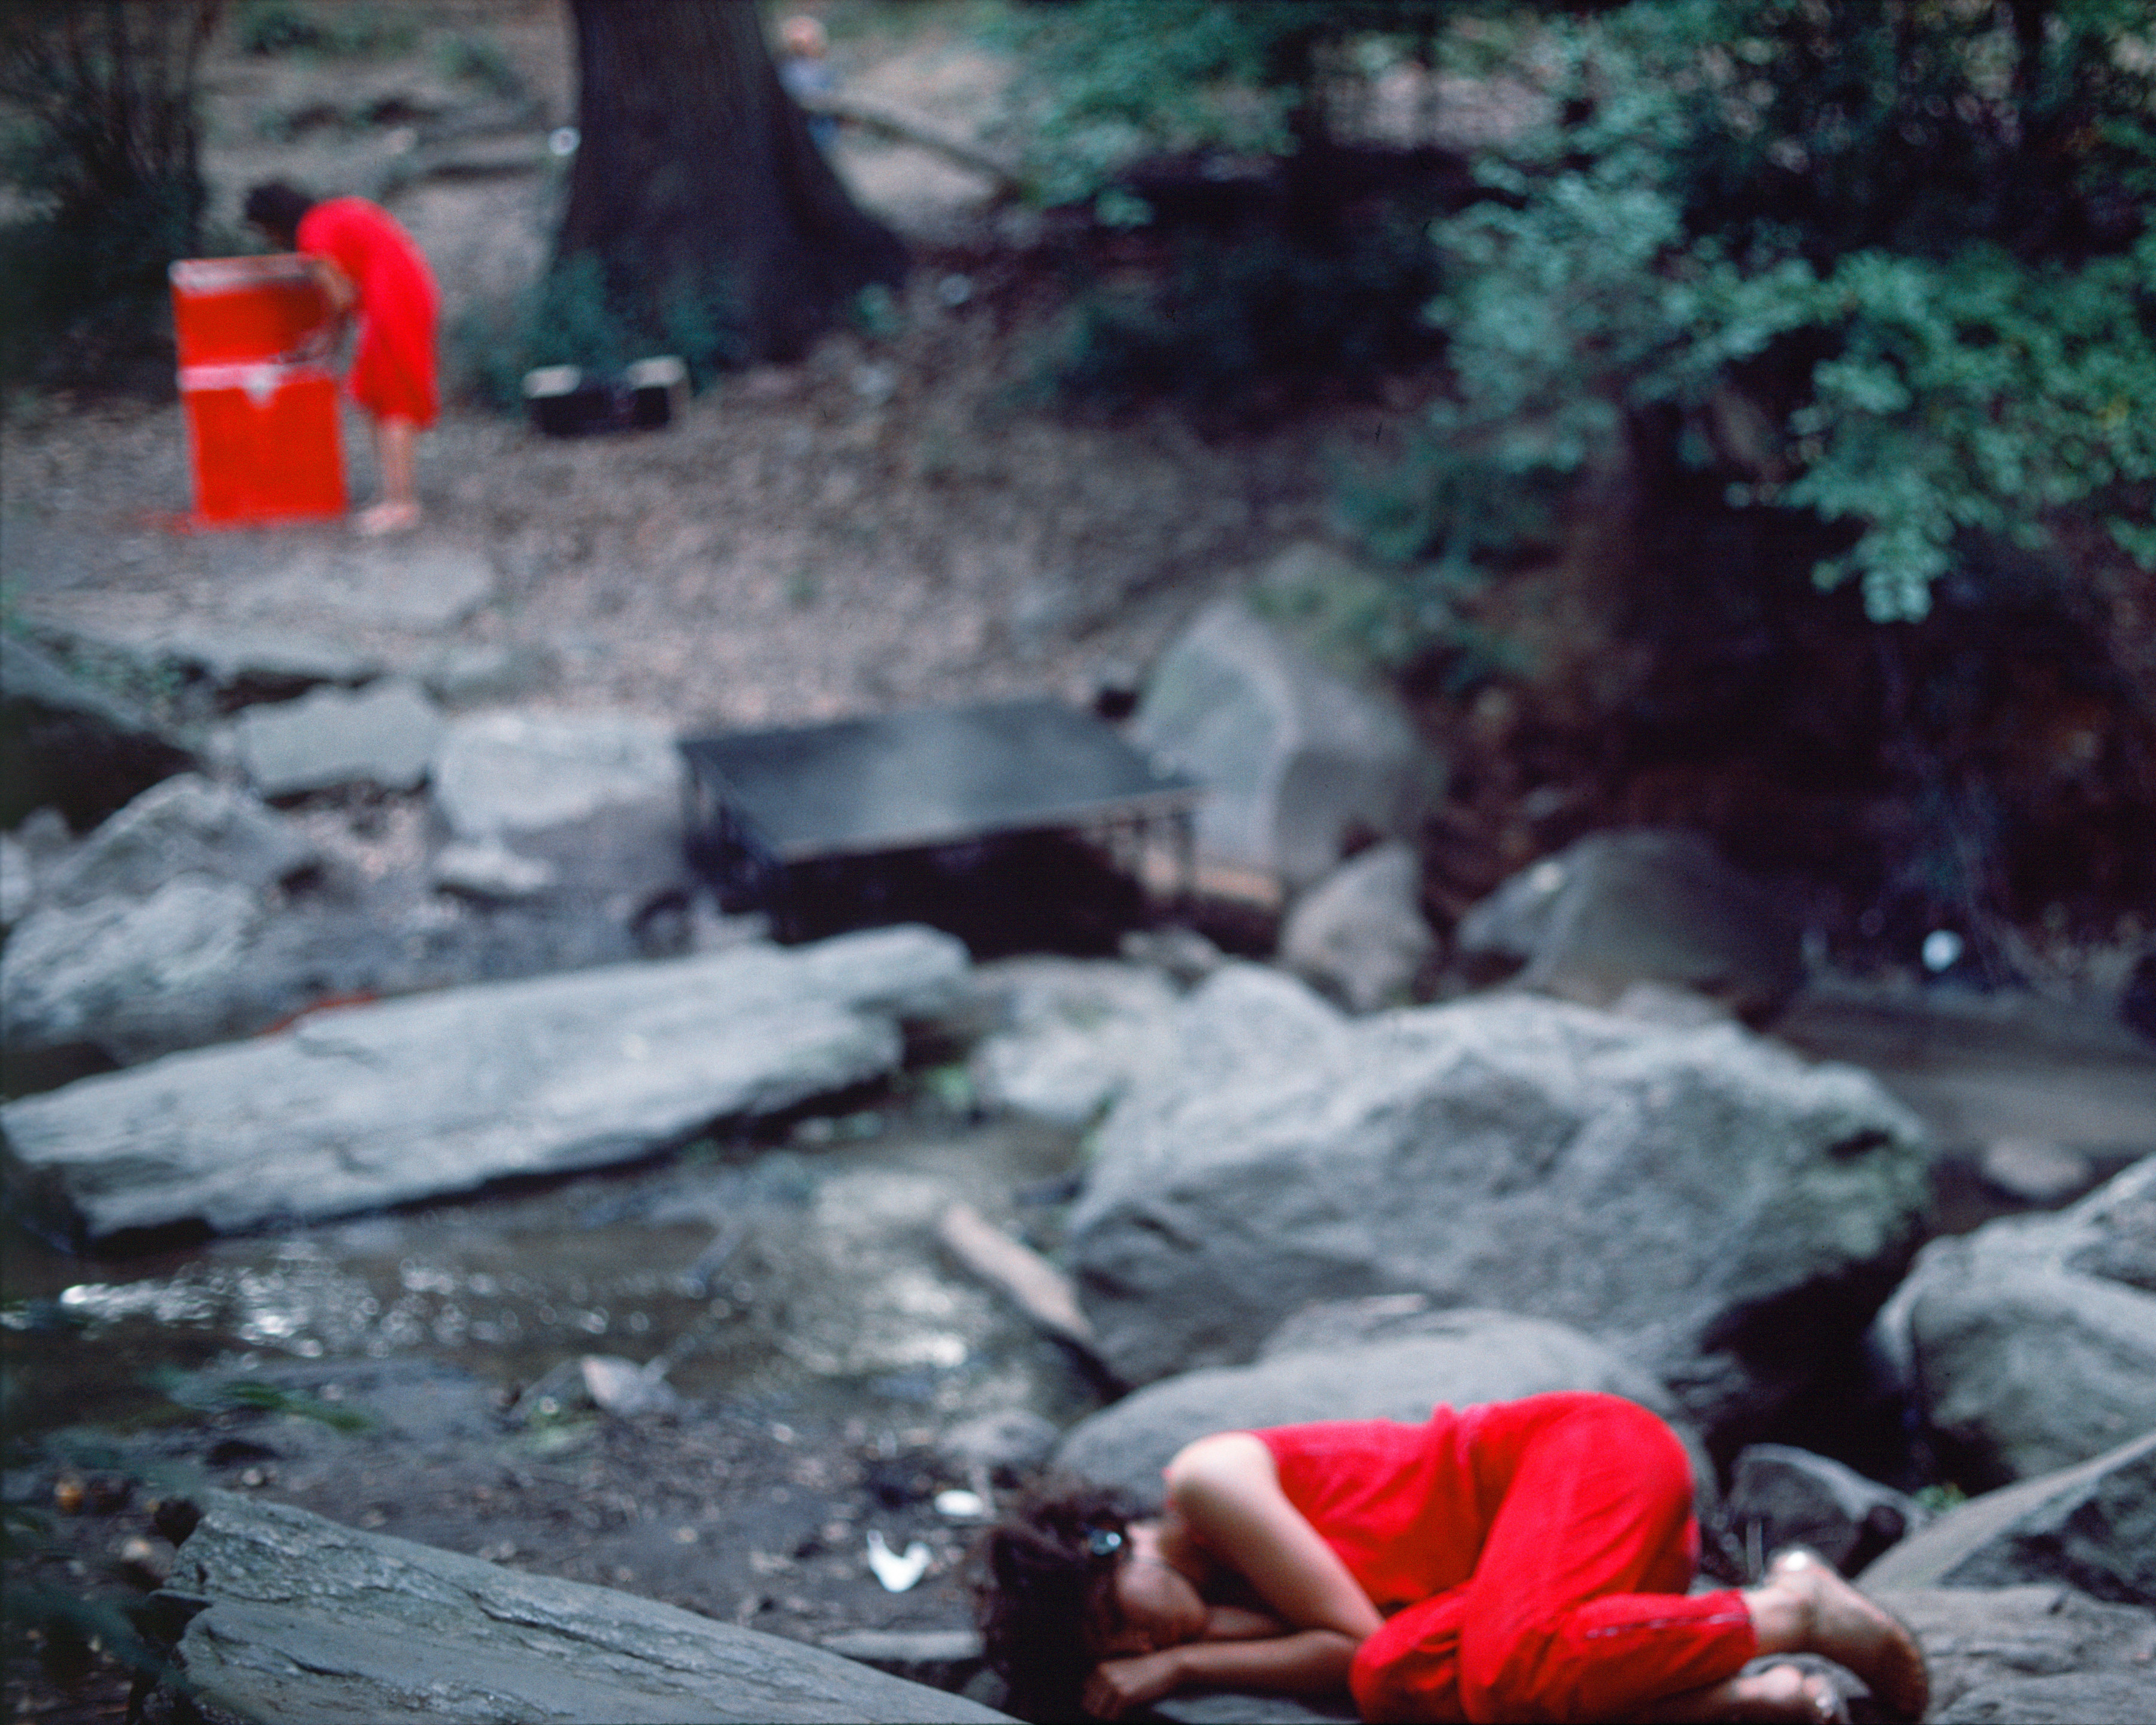 Rivers, First Draft: The Woman in Red cooks, and the Teenager in Magenta lies curled across the stream, 1982/2015, Digital C-print from Kodachrome 35mm slides in 48 parts, 16h x 20w in (40.64h x 50.80w cm)